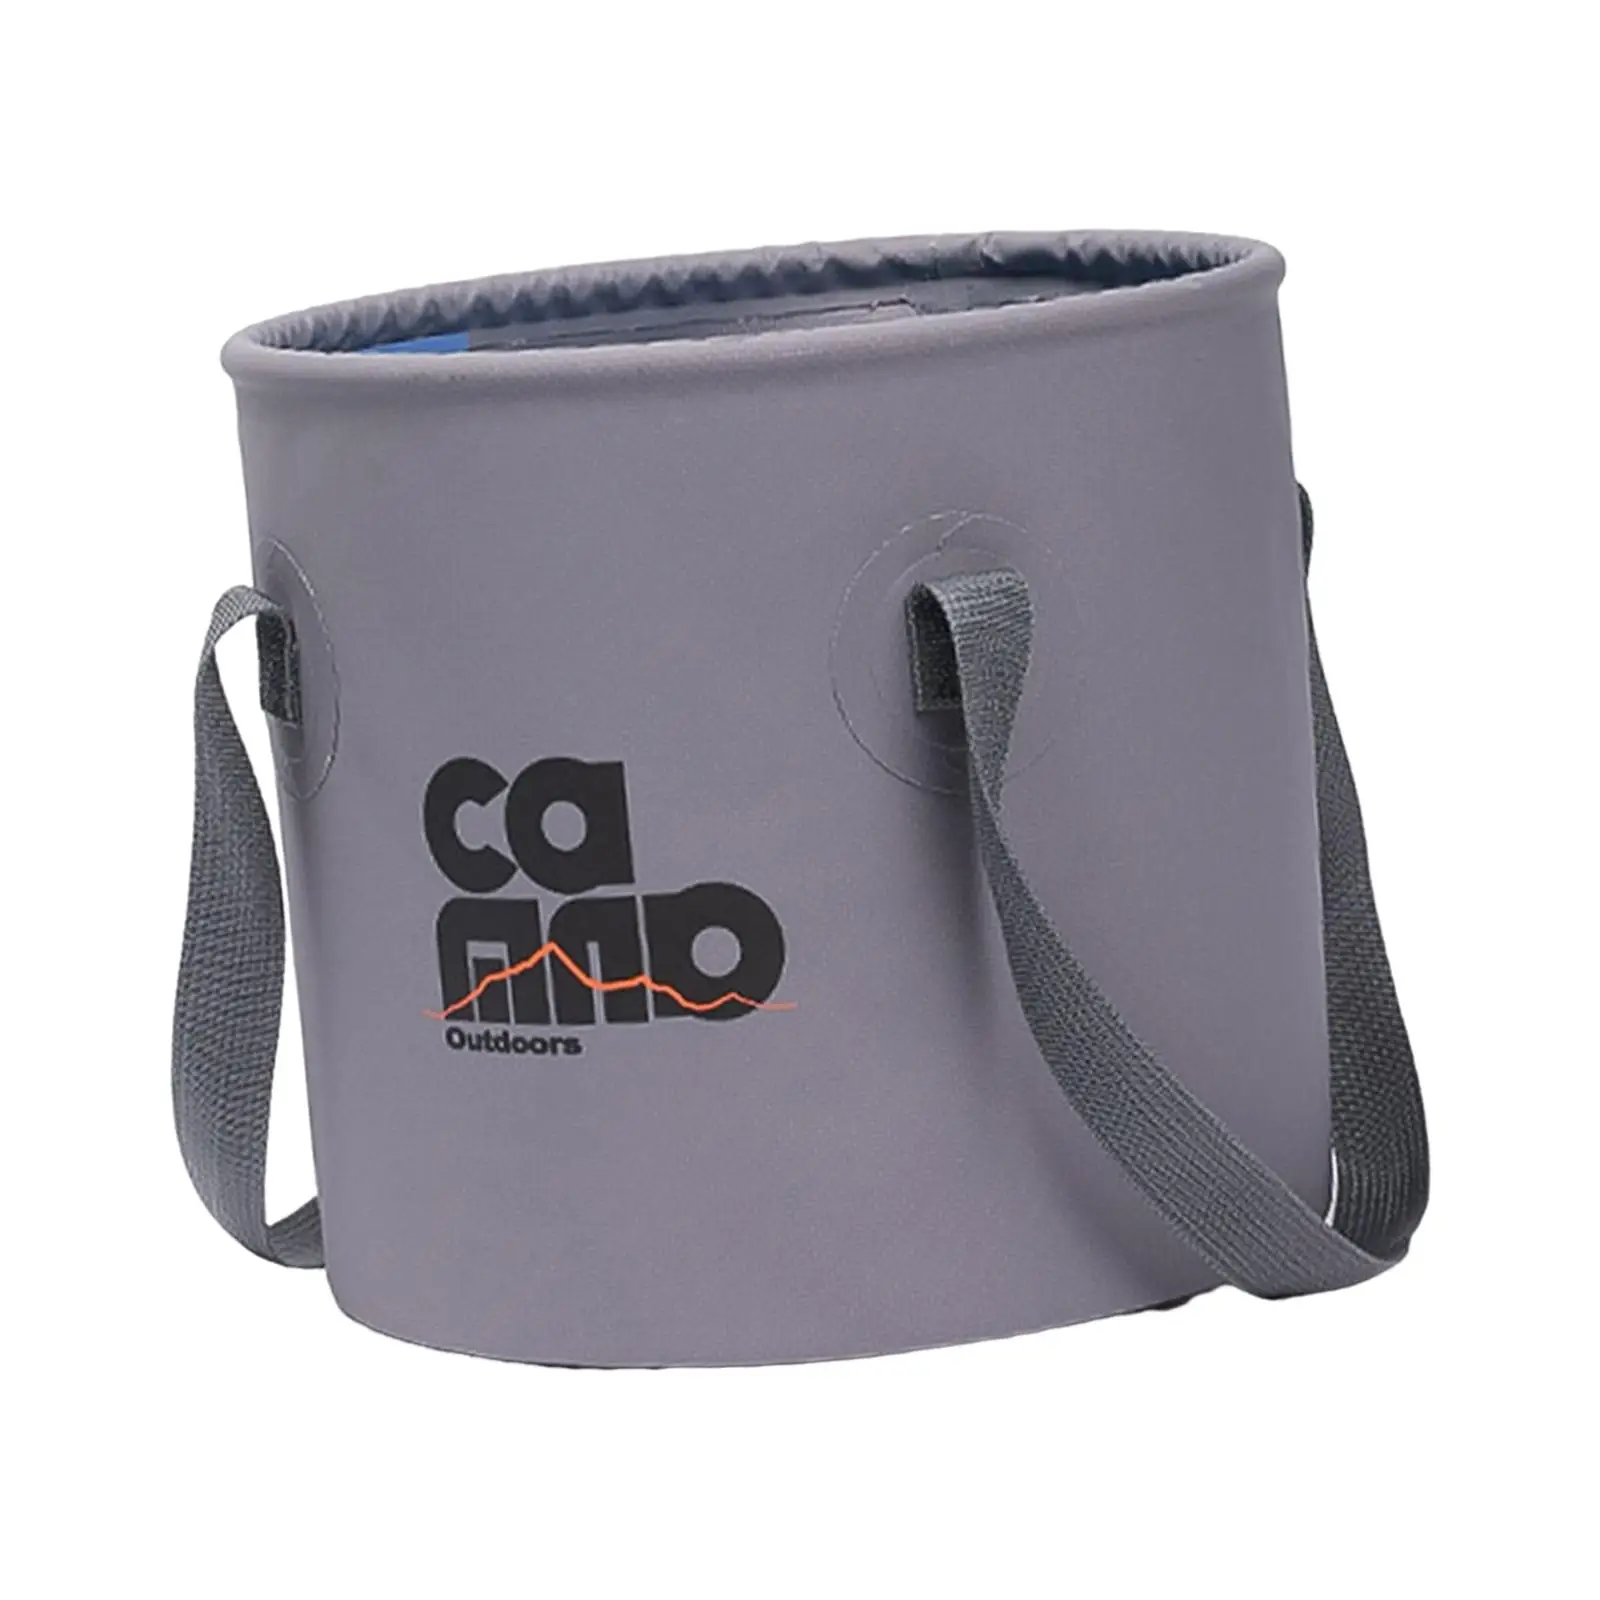 Collapsible Bucket Water Storage Bag Water Container for Travelling Hiking